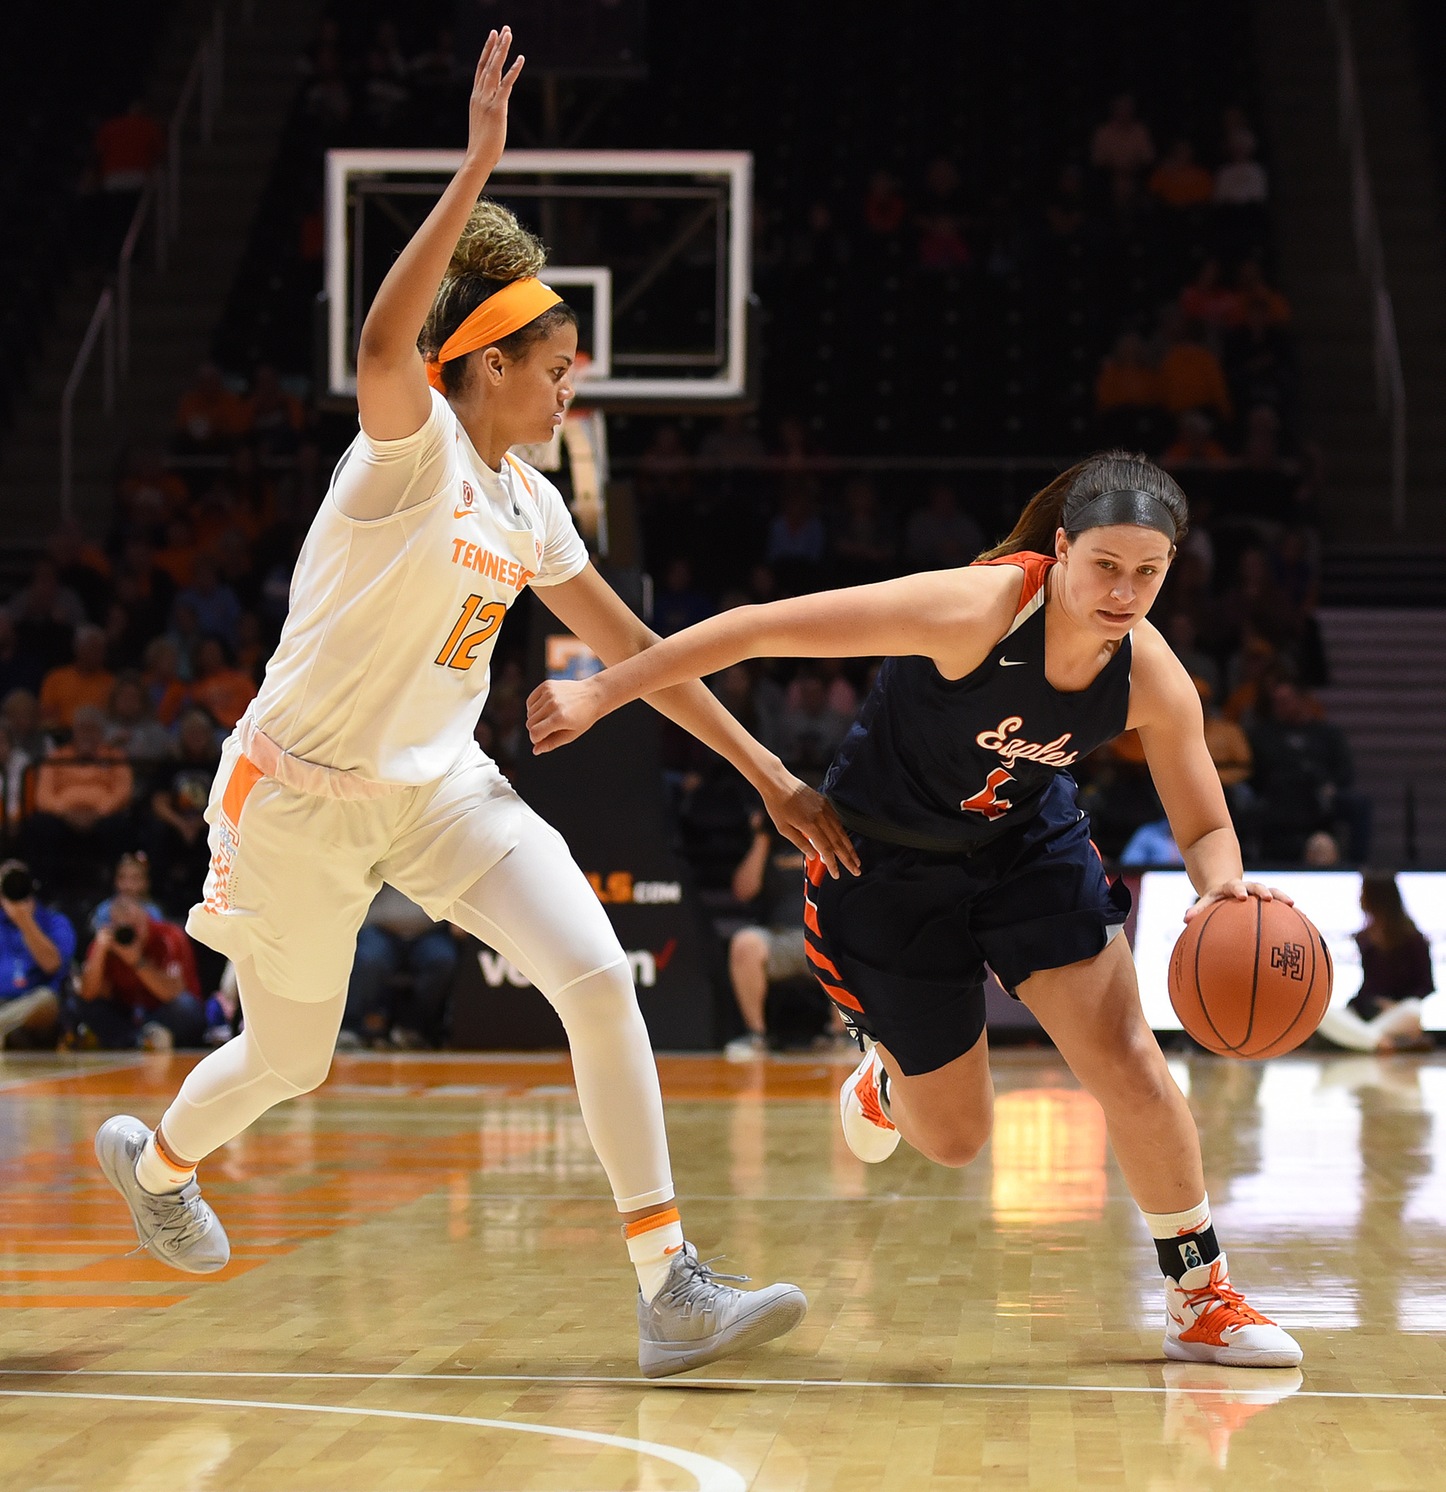 C-N and UT ignite campaigns in exhibition on Rocky Top Tuesday